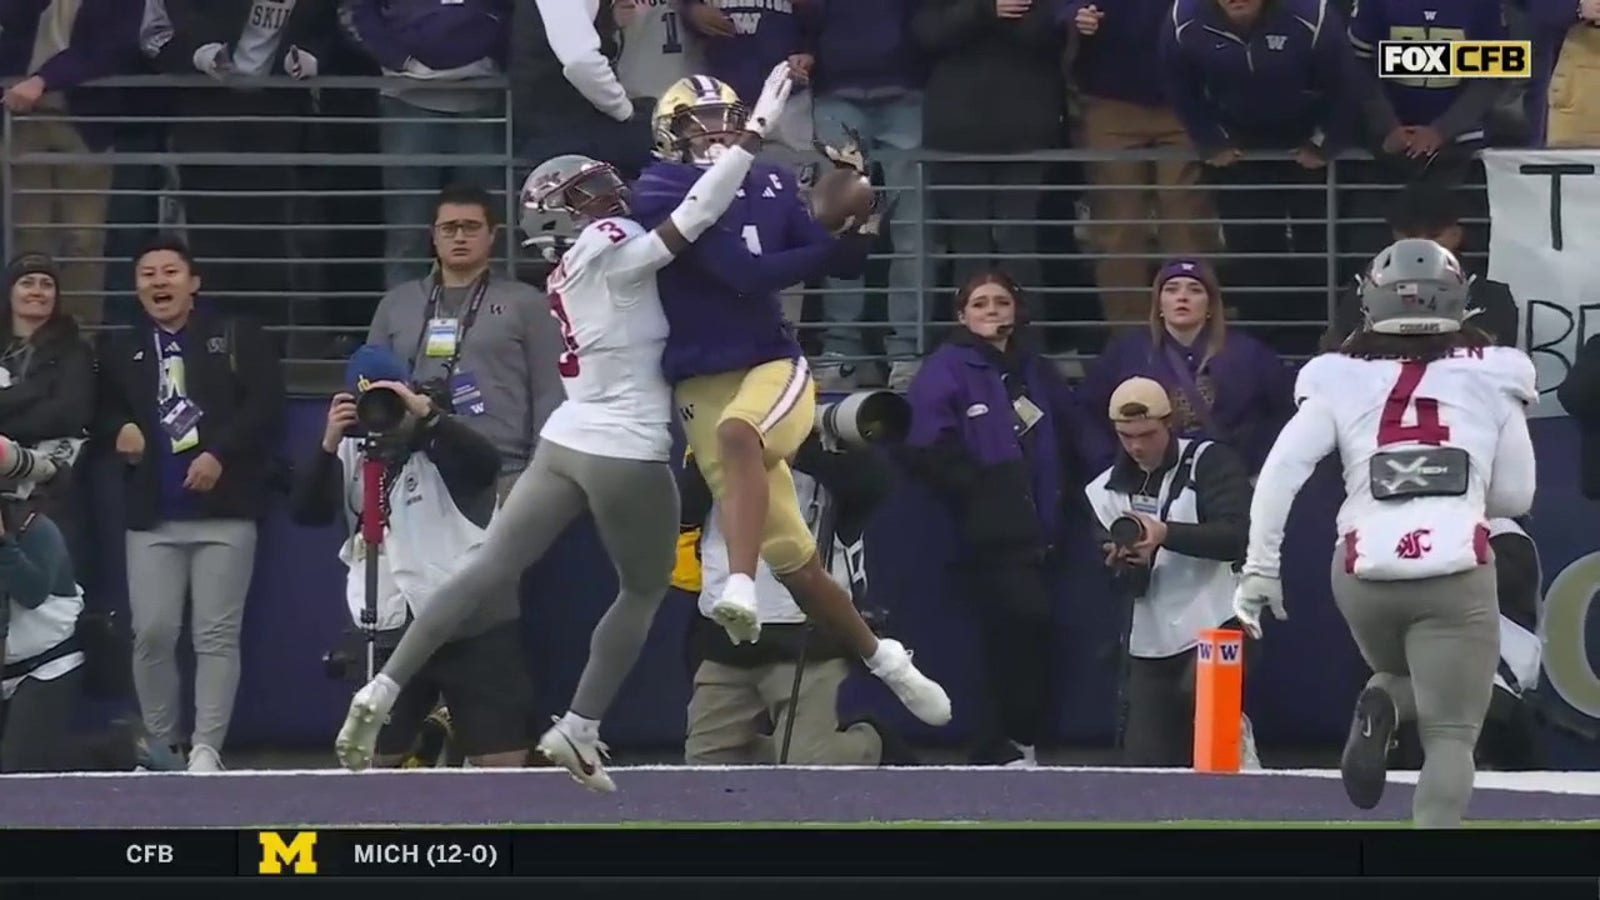 Rome Odunze hauls in his second TD against Washington State